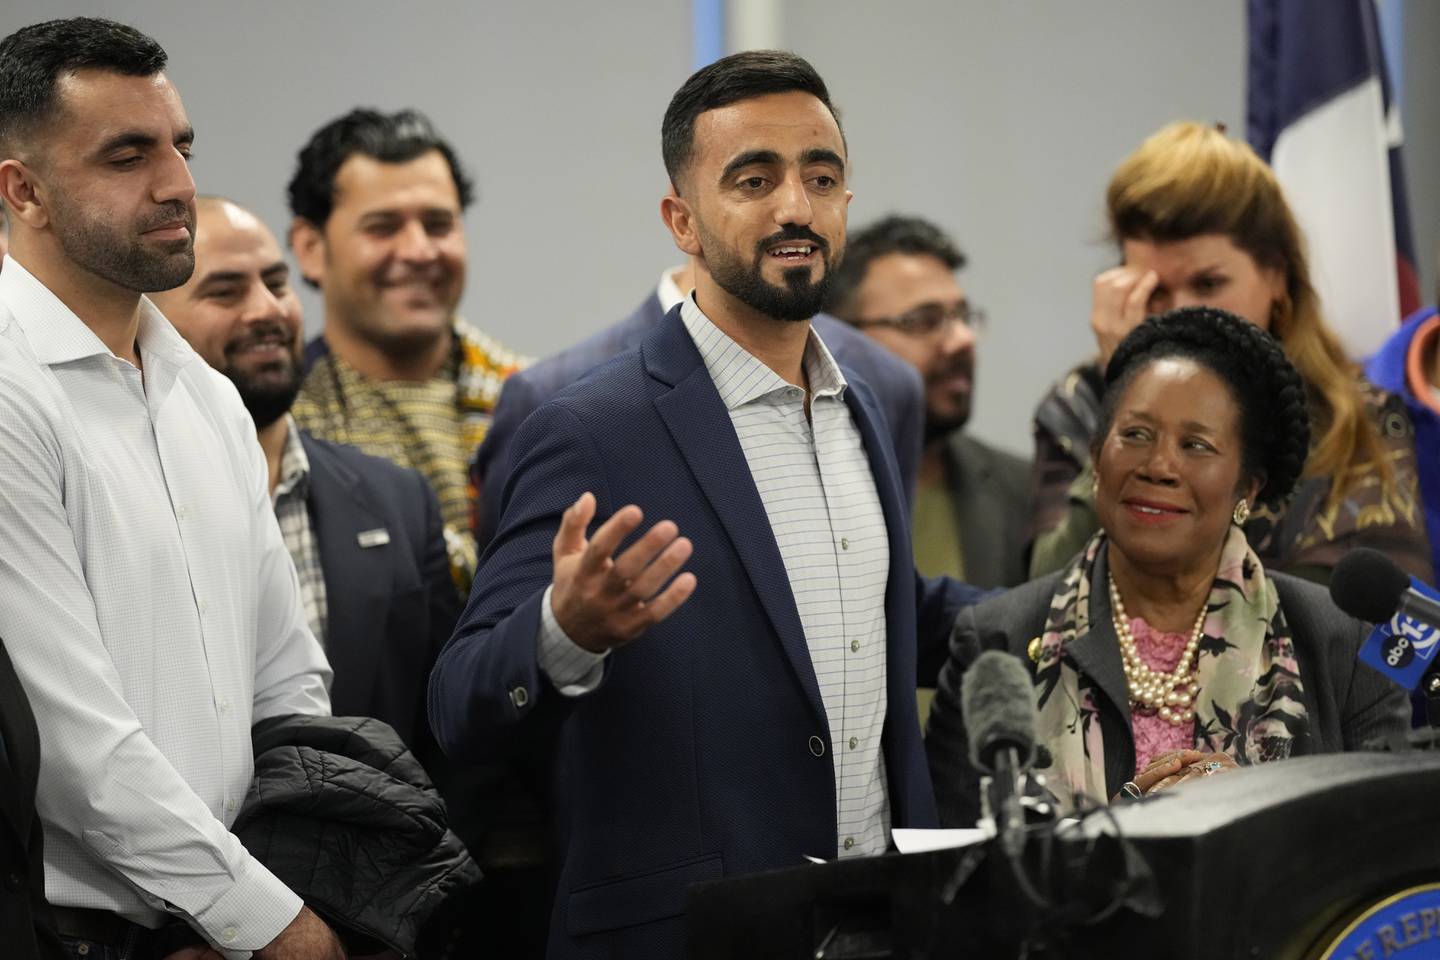 Abdul Wasi Safi, center, speaks as his brother, Sami-ullah Safi, left, and U.S. Rep. Sheila Jackson Lee, D-Texas, right, listen during a news conference Friday, Jan. 27, 2023, in Houston.